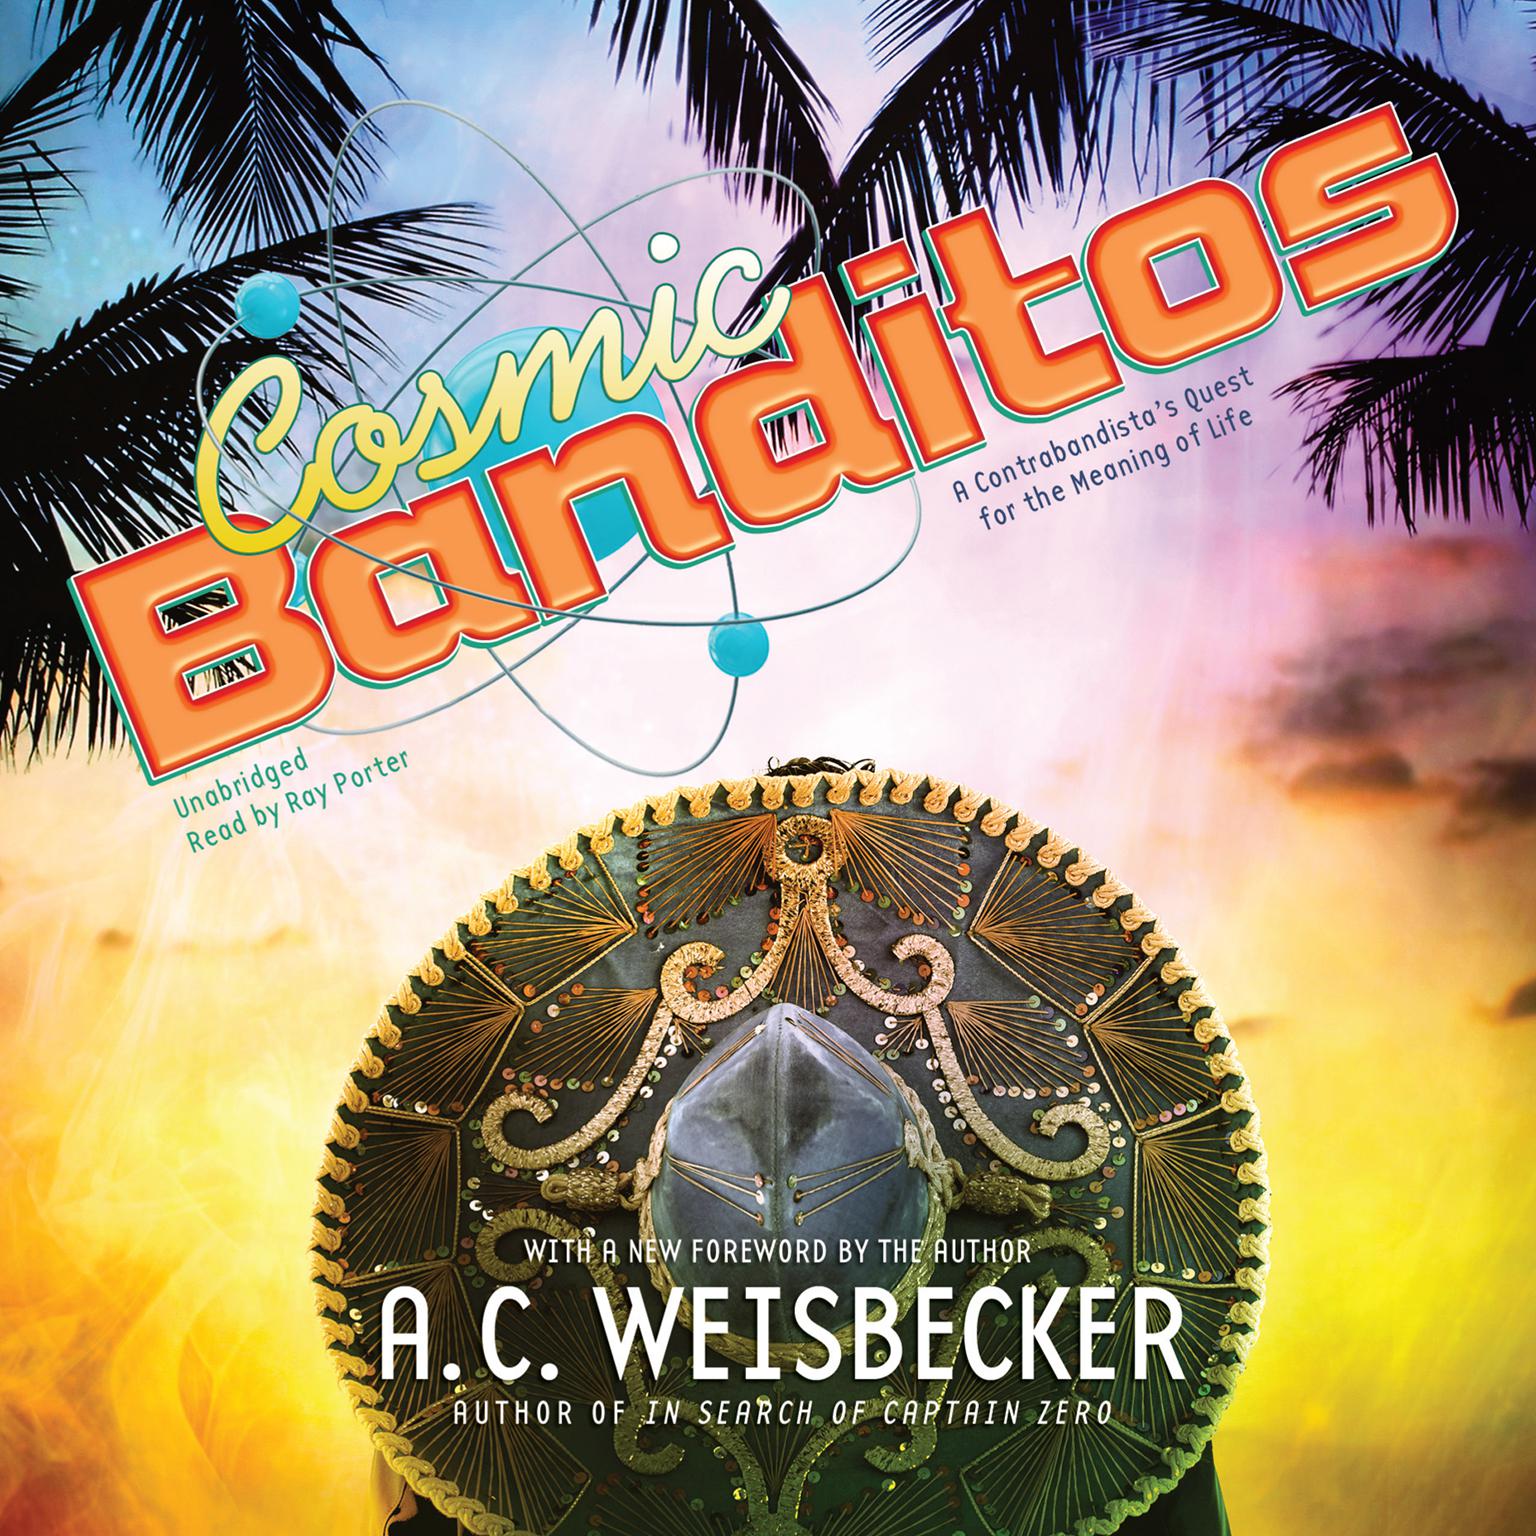 Cosmic Banditos: A Contrabandistas Quest for the Meaning of Life Audiobook, by Allan C. Weisbecker